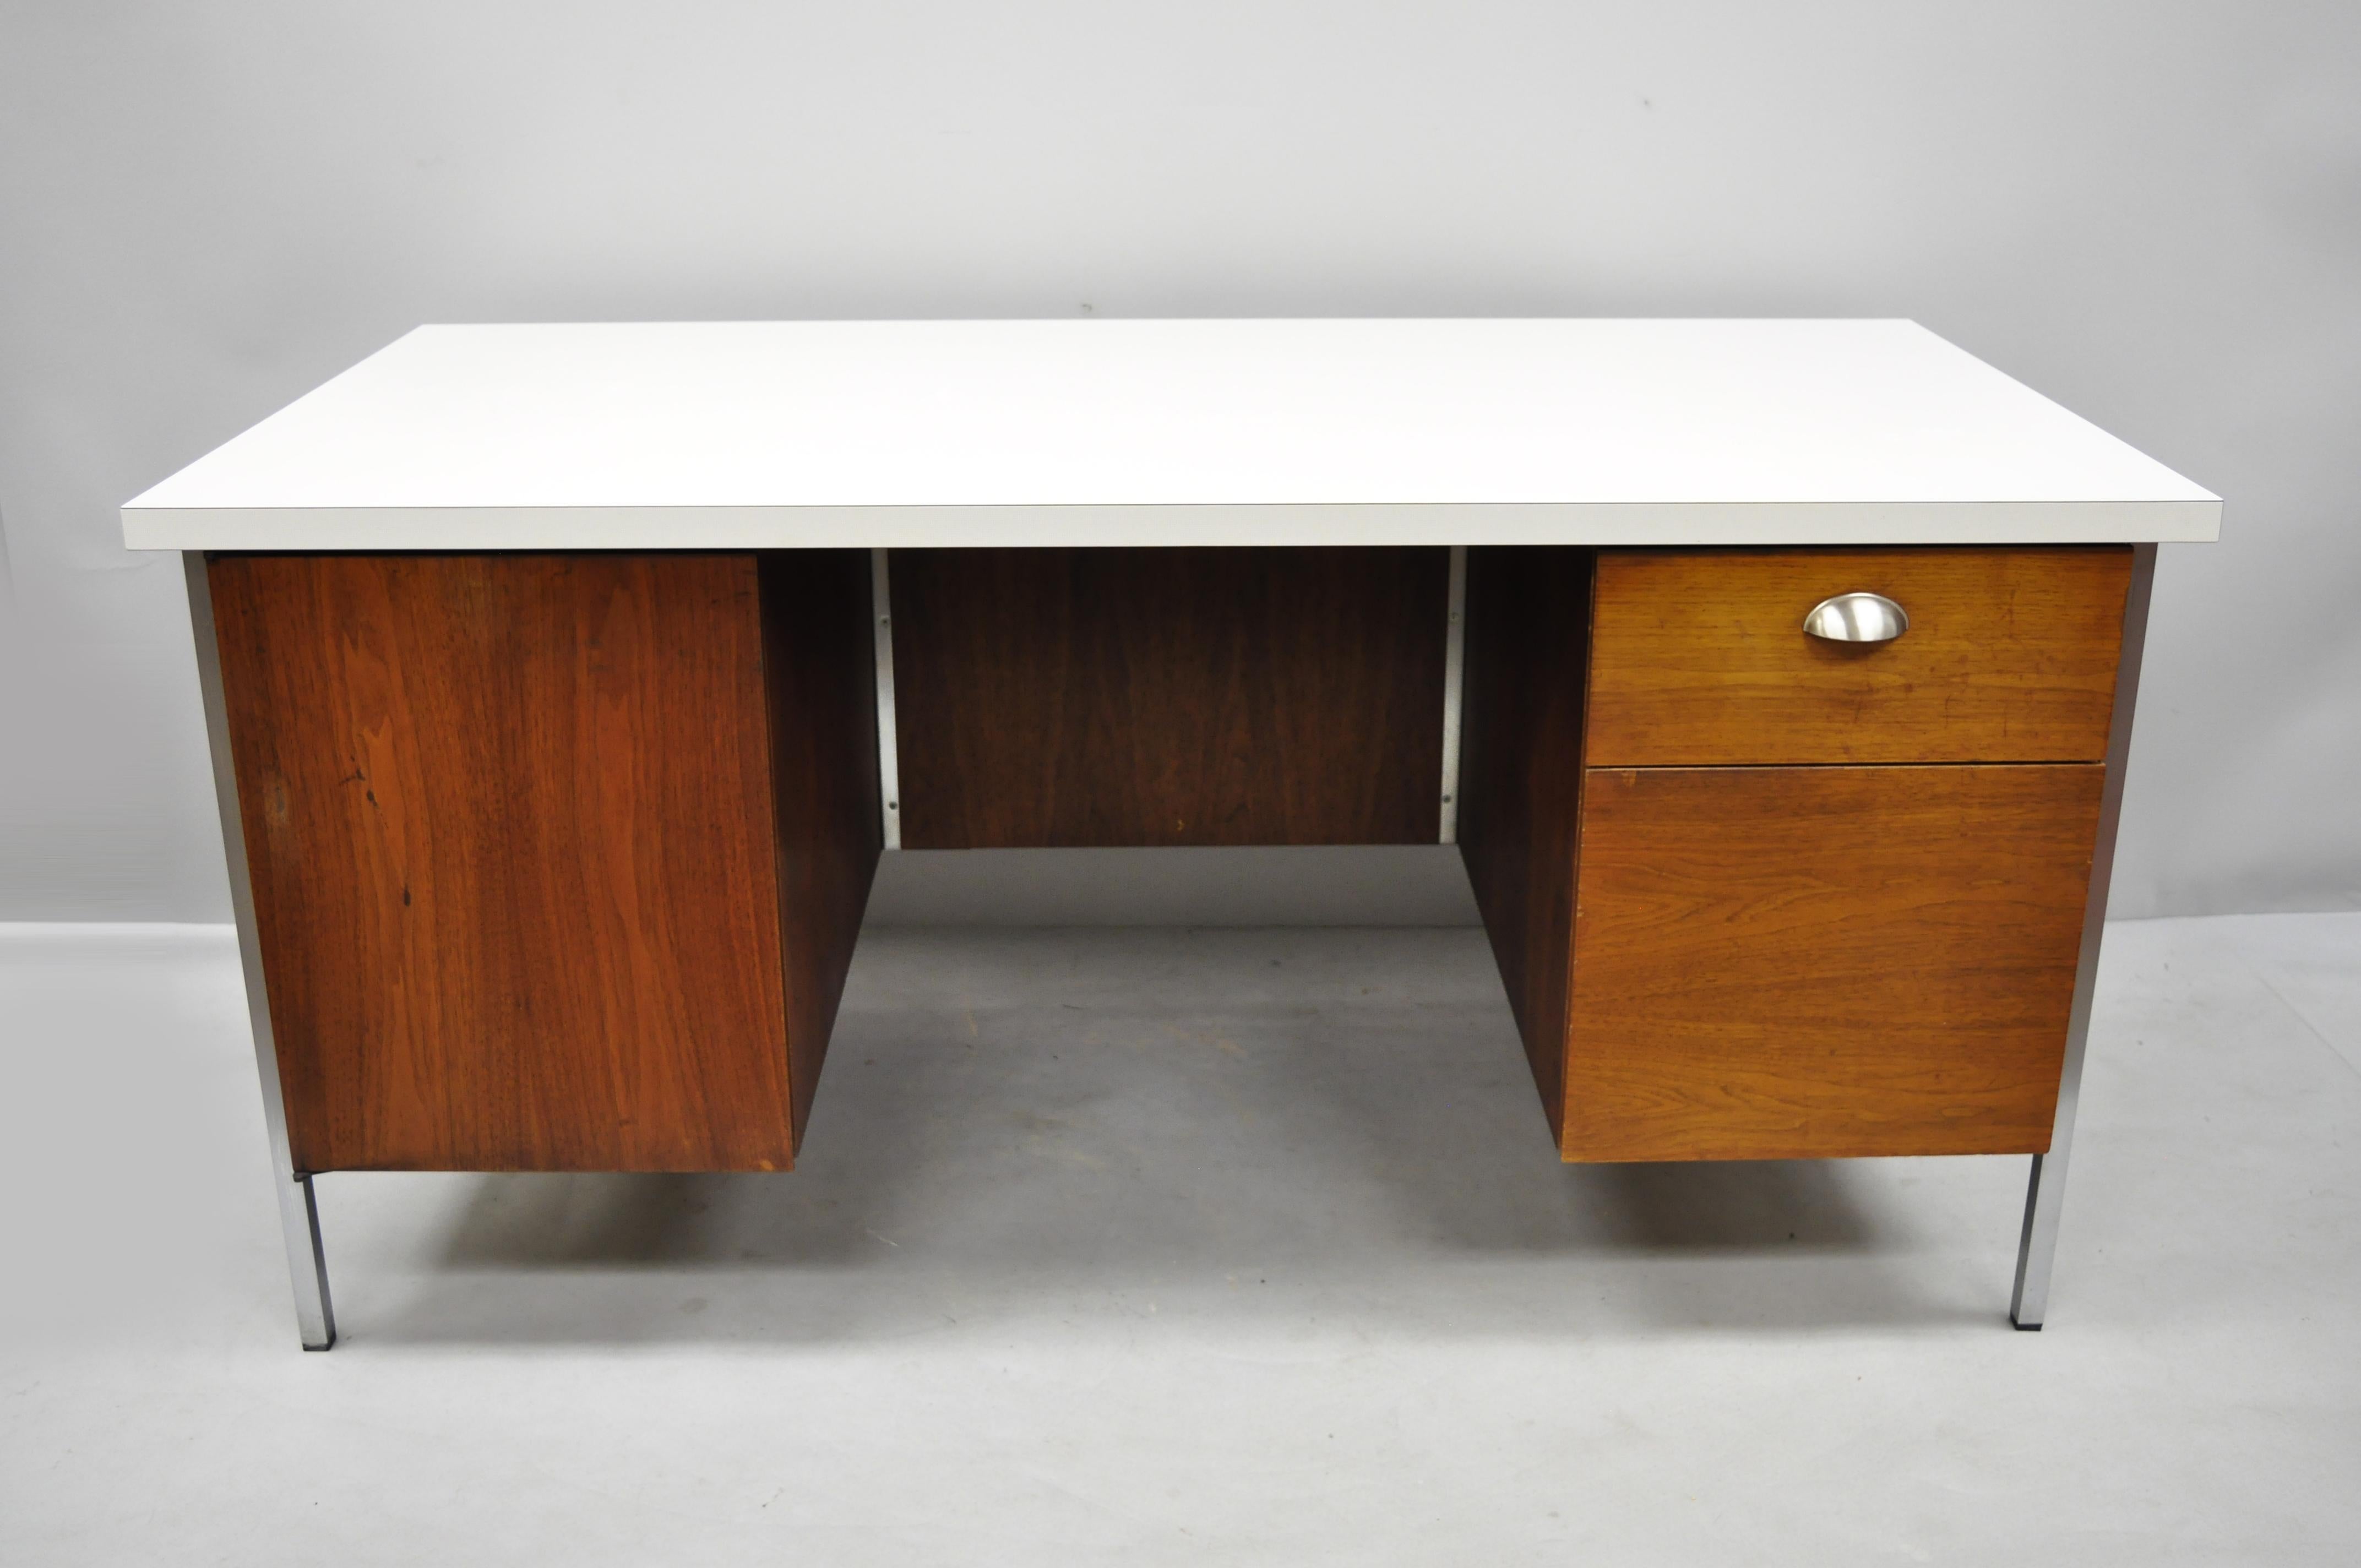 Florence knoll walnut executive desk with laminate top. Item features chrome frame, white laminate top, 2 drawers, 1 swing door, beautiful wood grain, finished back, original label. Measurements: 29